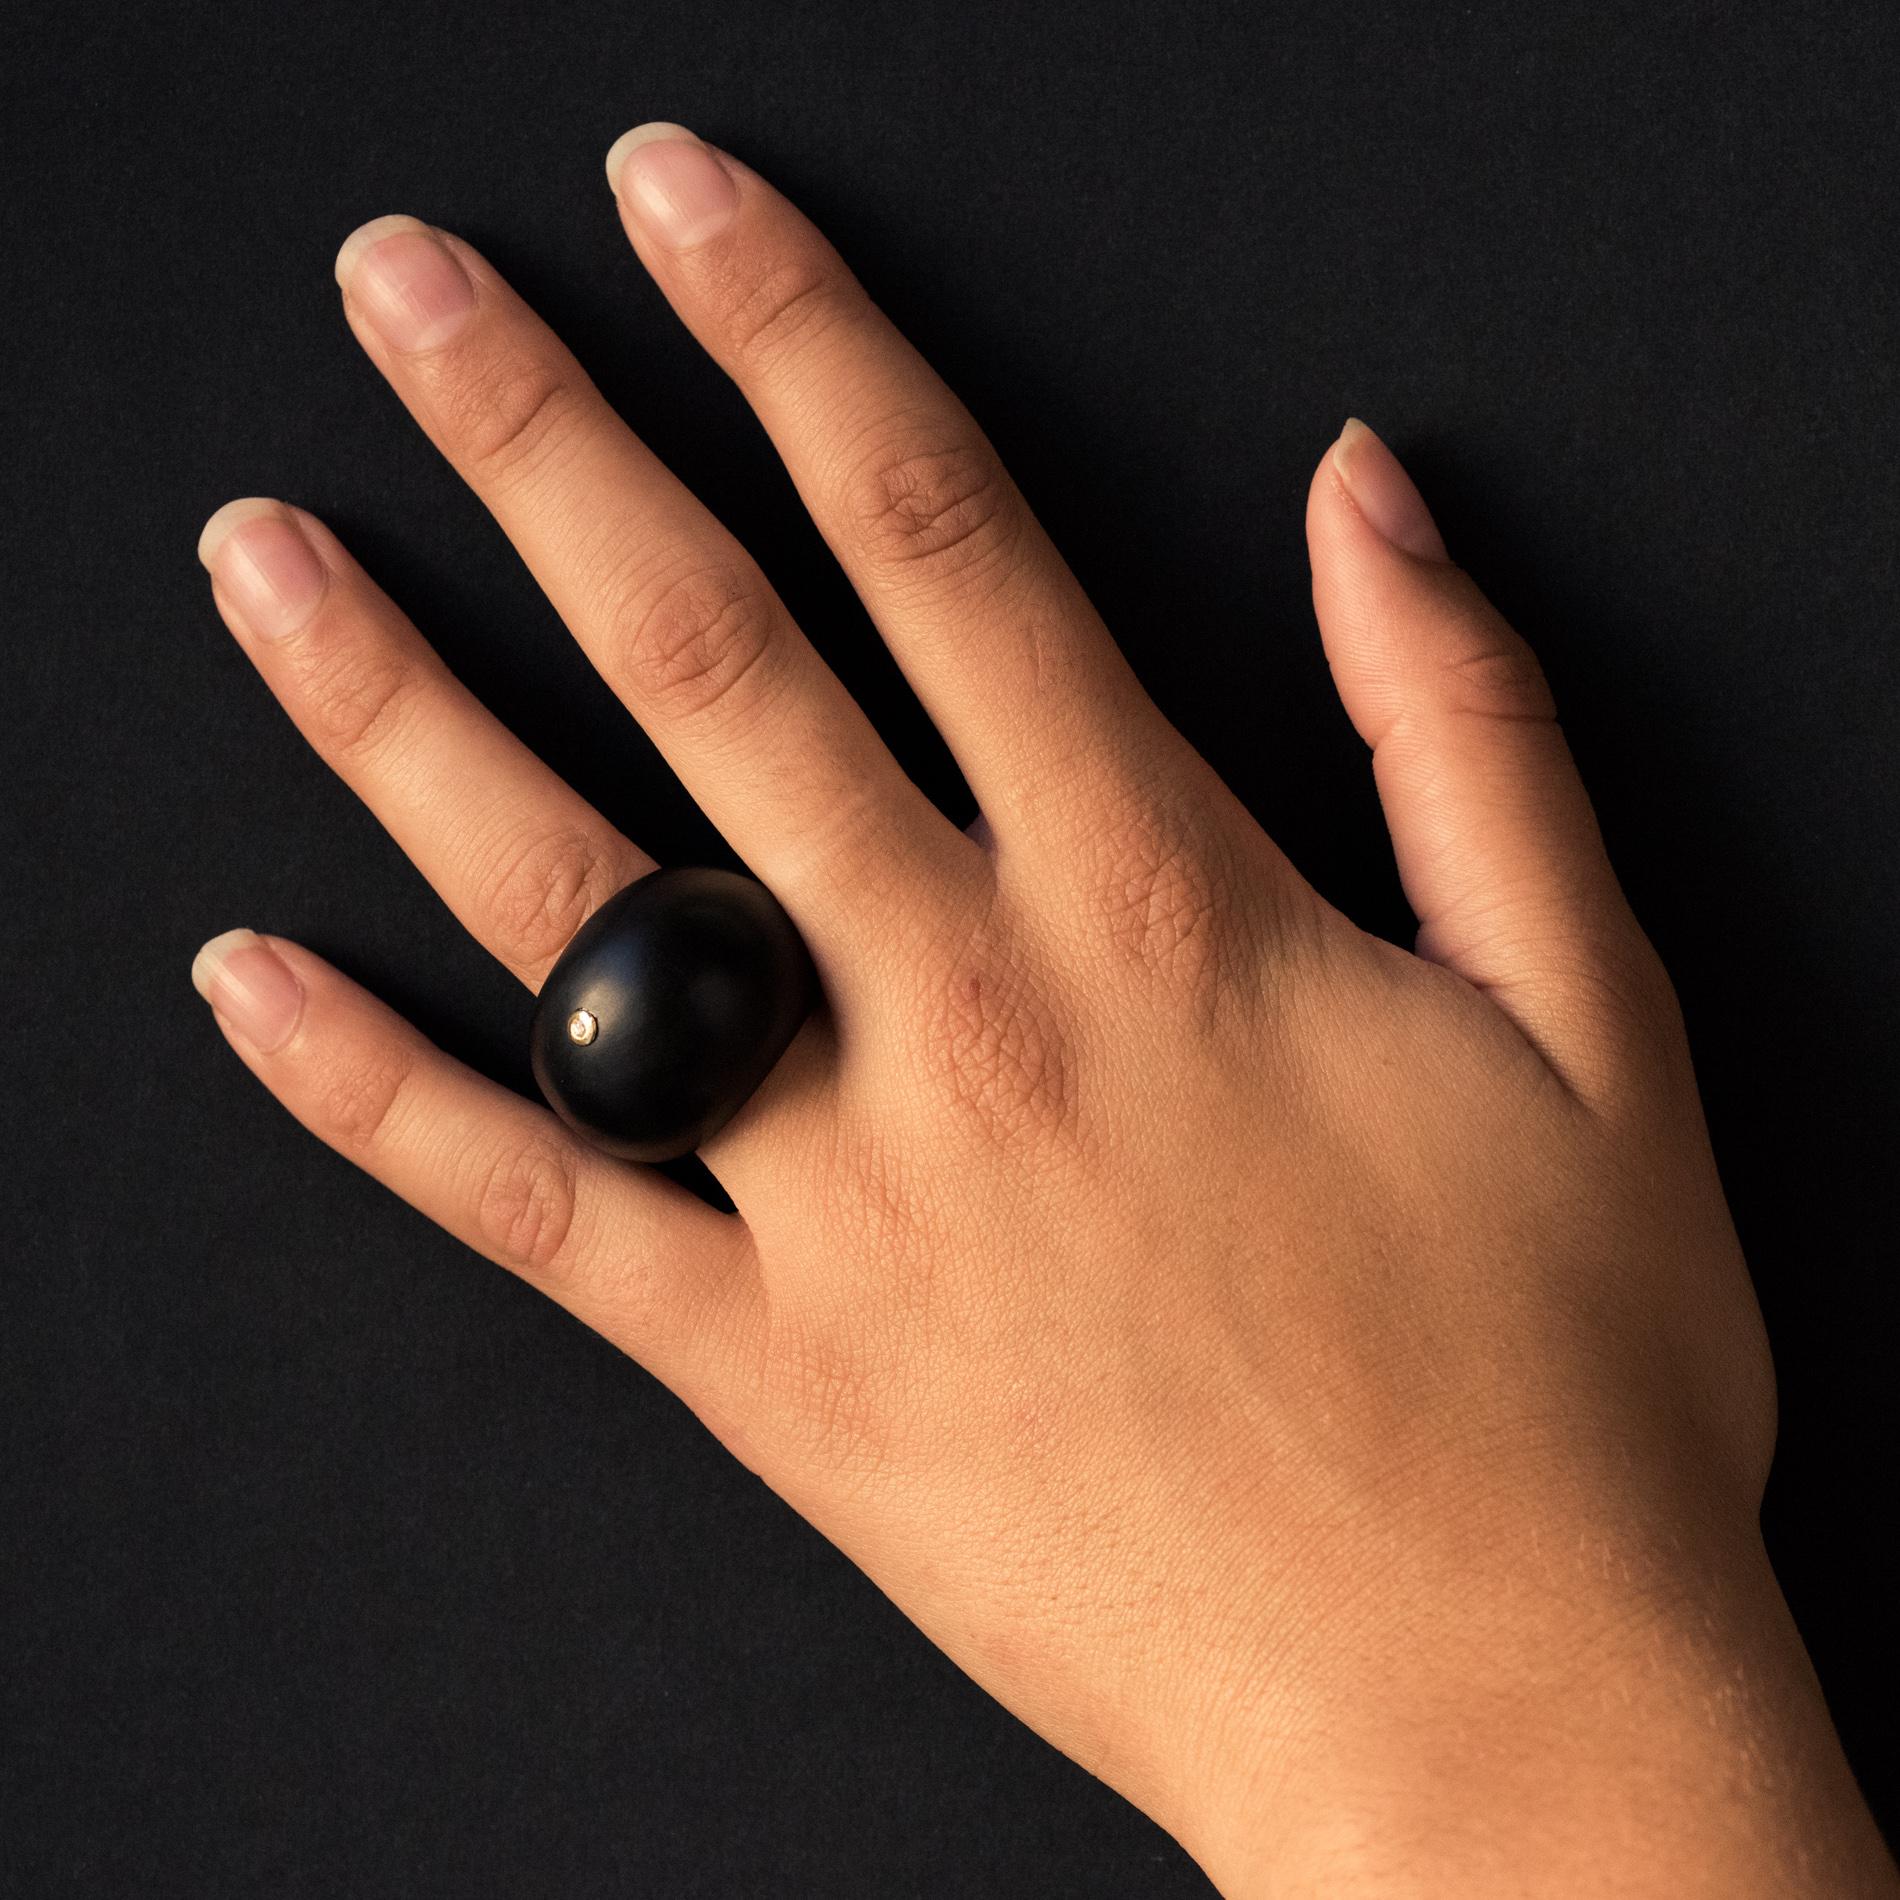 Ring in ebony.
This ball-shaped ring is adorned on its top with a diamond set with yellow gold.
Total weight of diamond: 0.016 carat approximately.
Height: 22.2 mm, width: 25 mm, thickness: 9.7 mm, width of the ring at the base: 11.5 mm.
Total